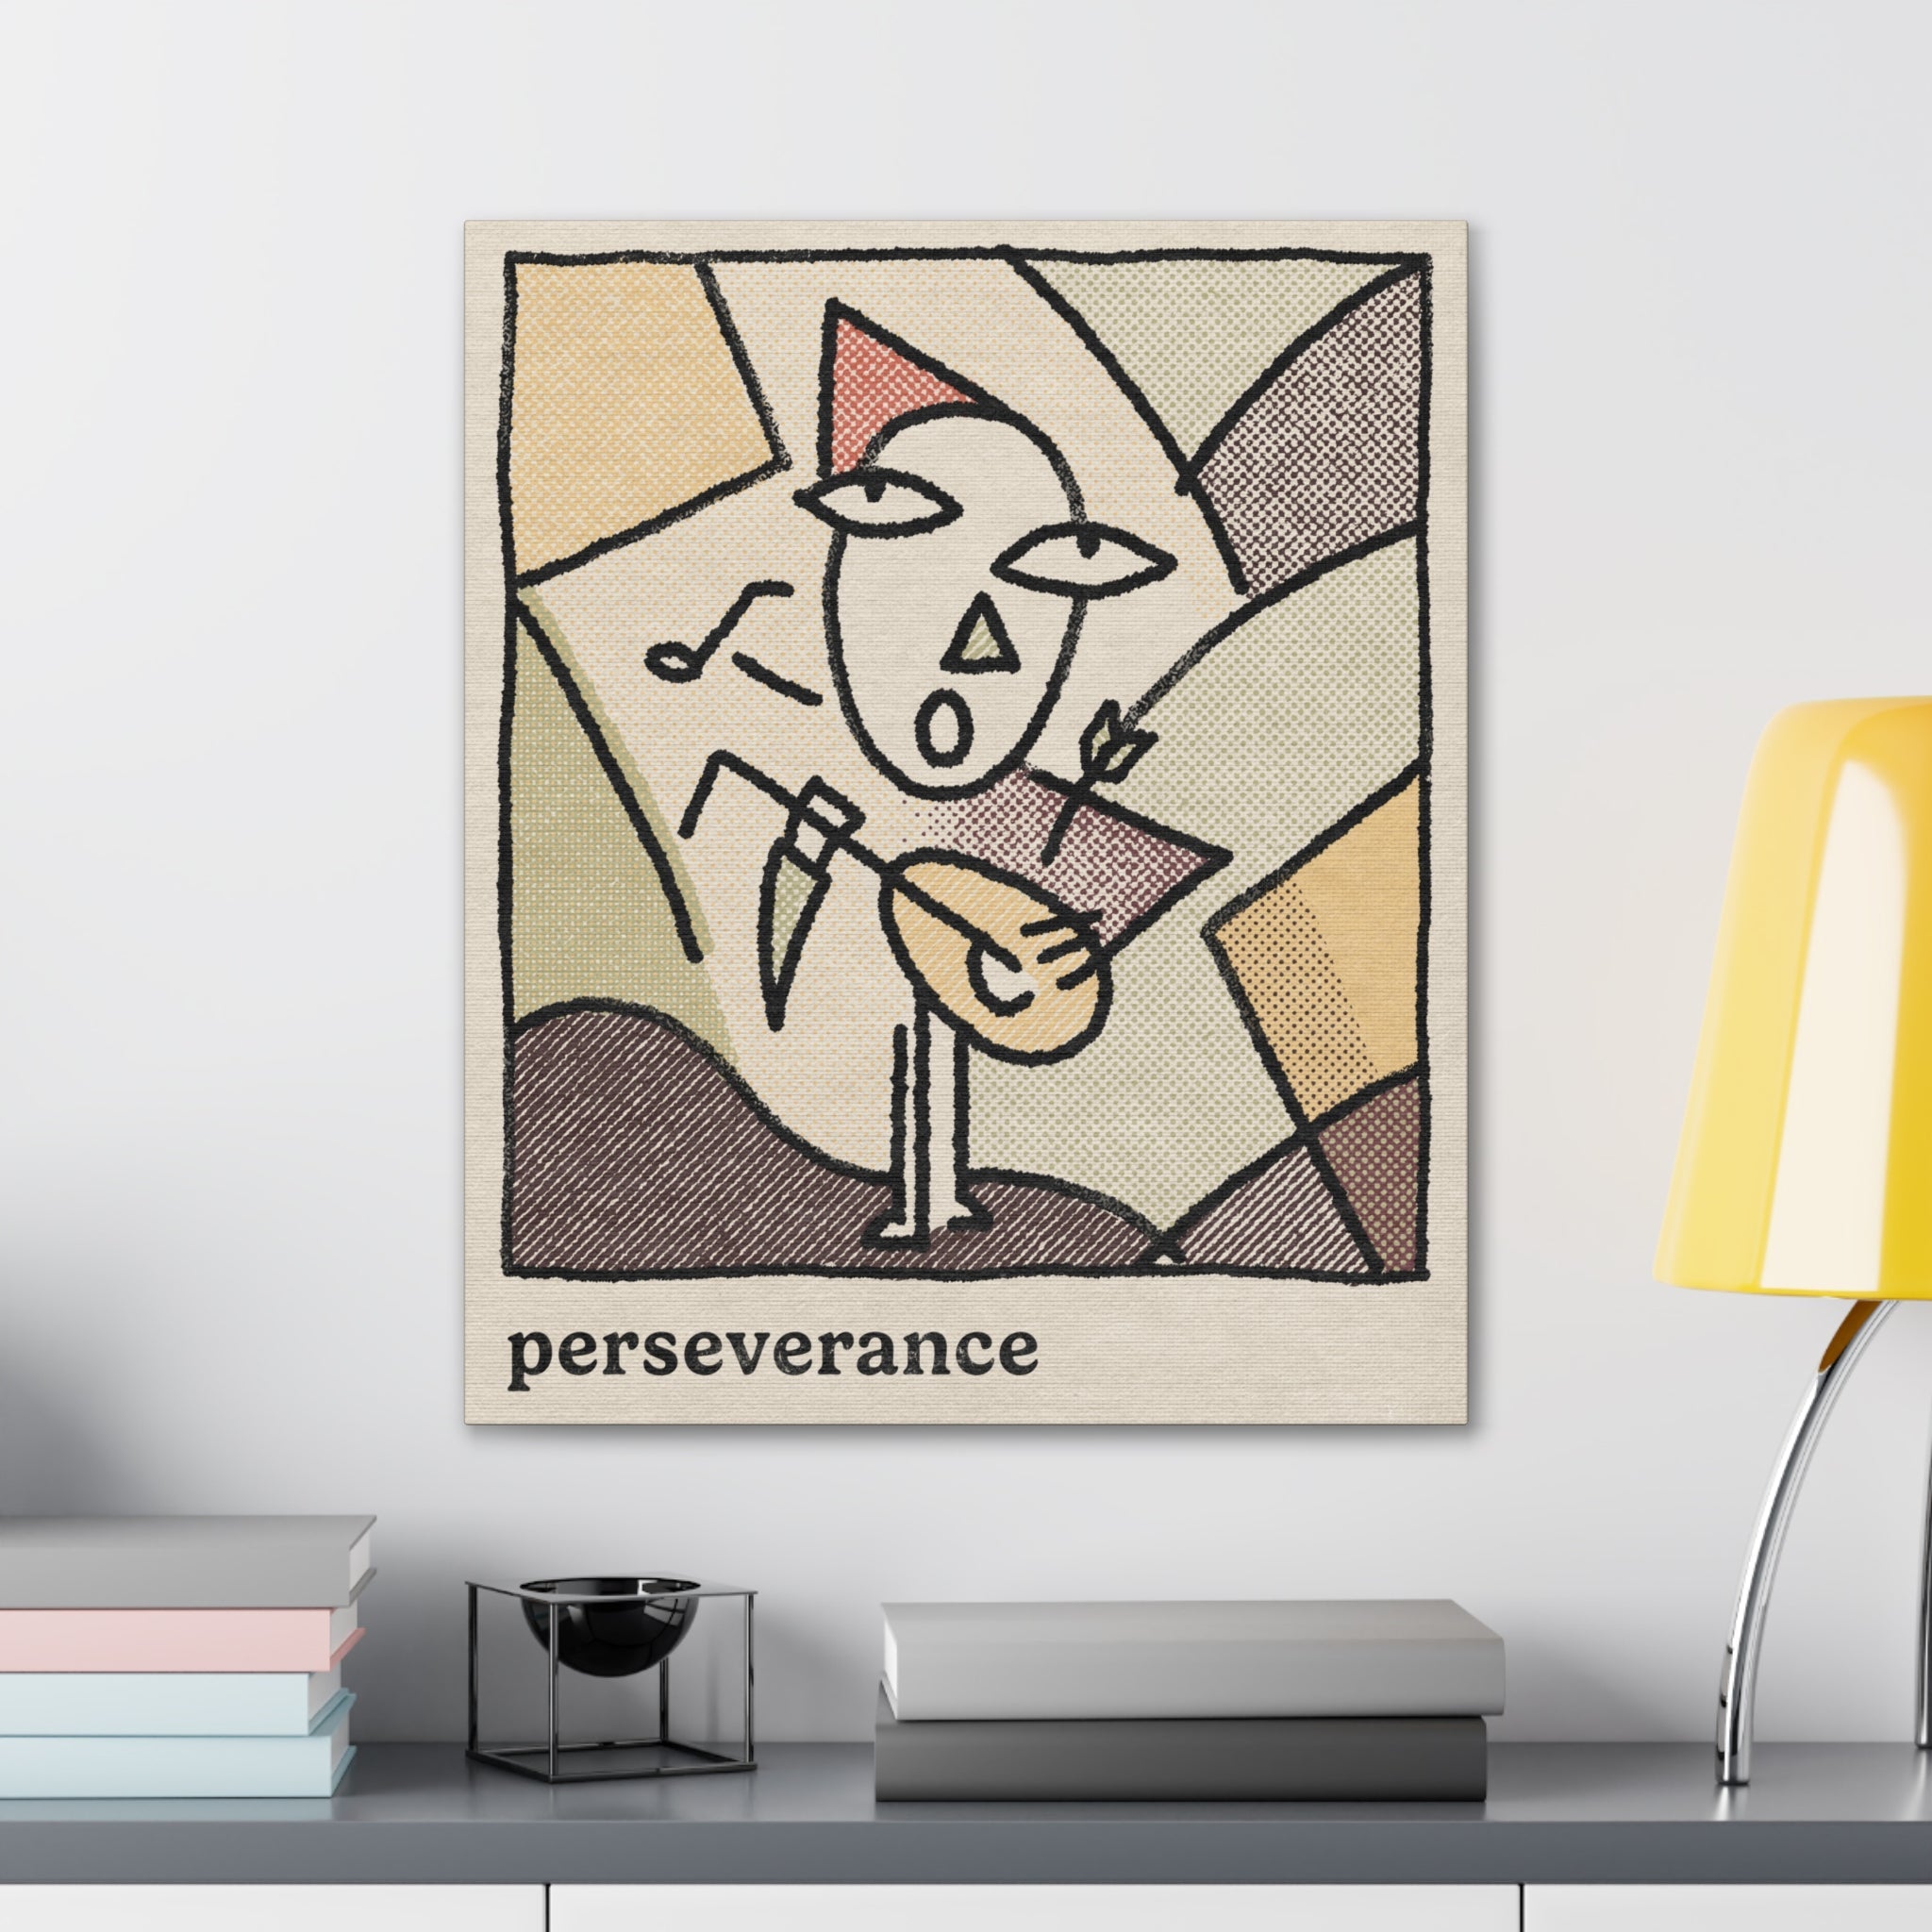 Perseverance | Canvas Gallery Wrap - Canvas - Ace of Gnomes - 69602290103573296616